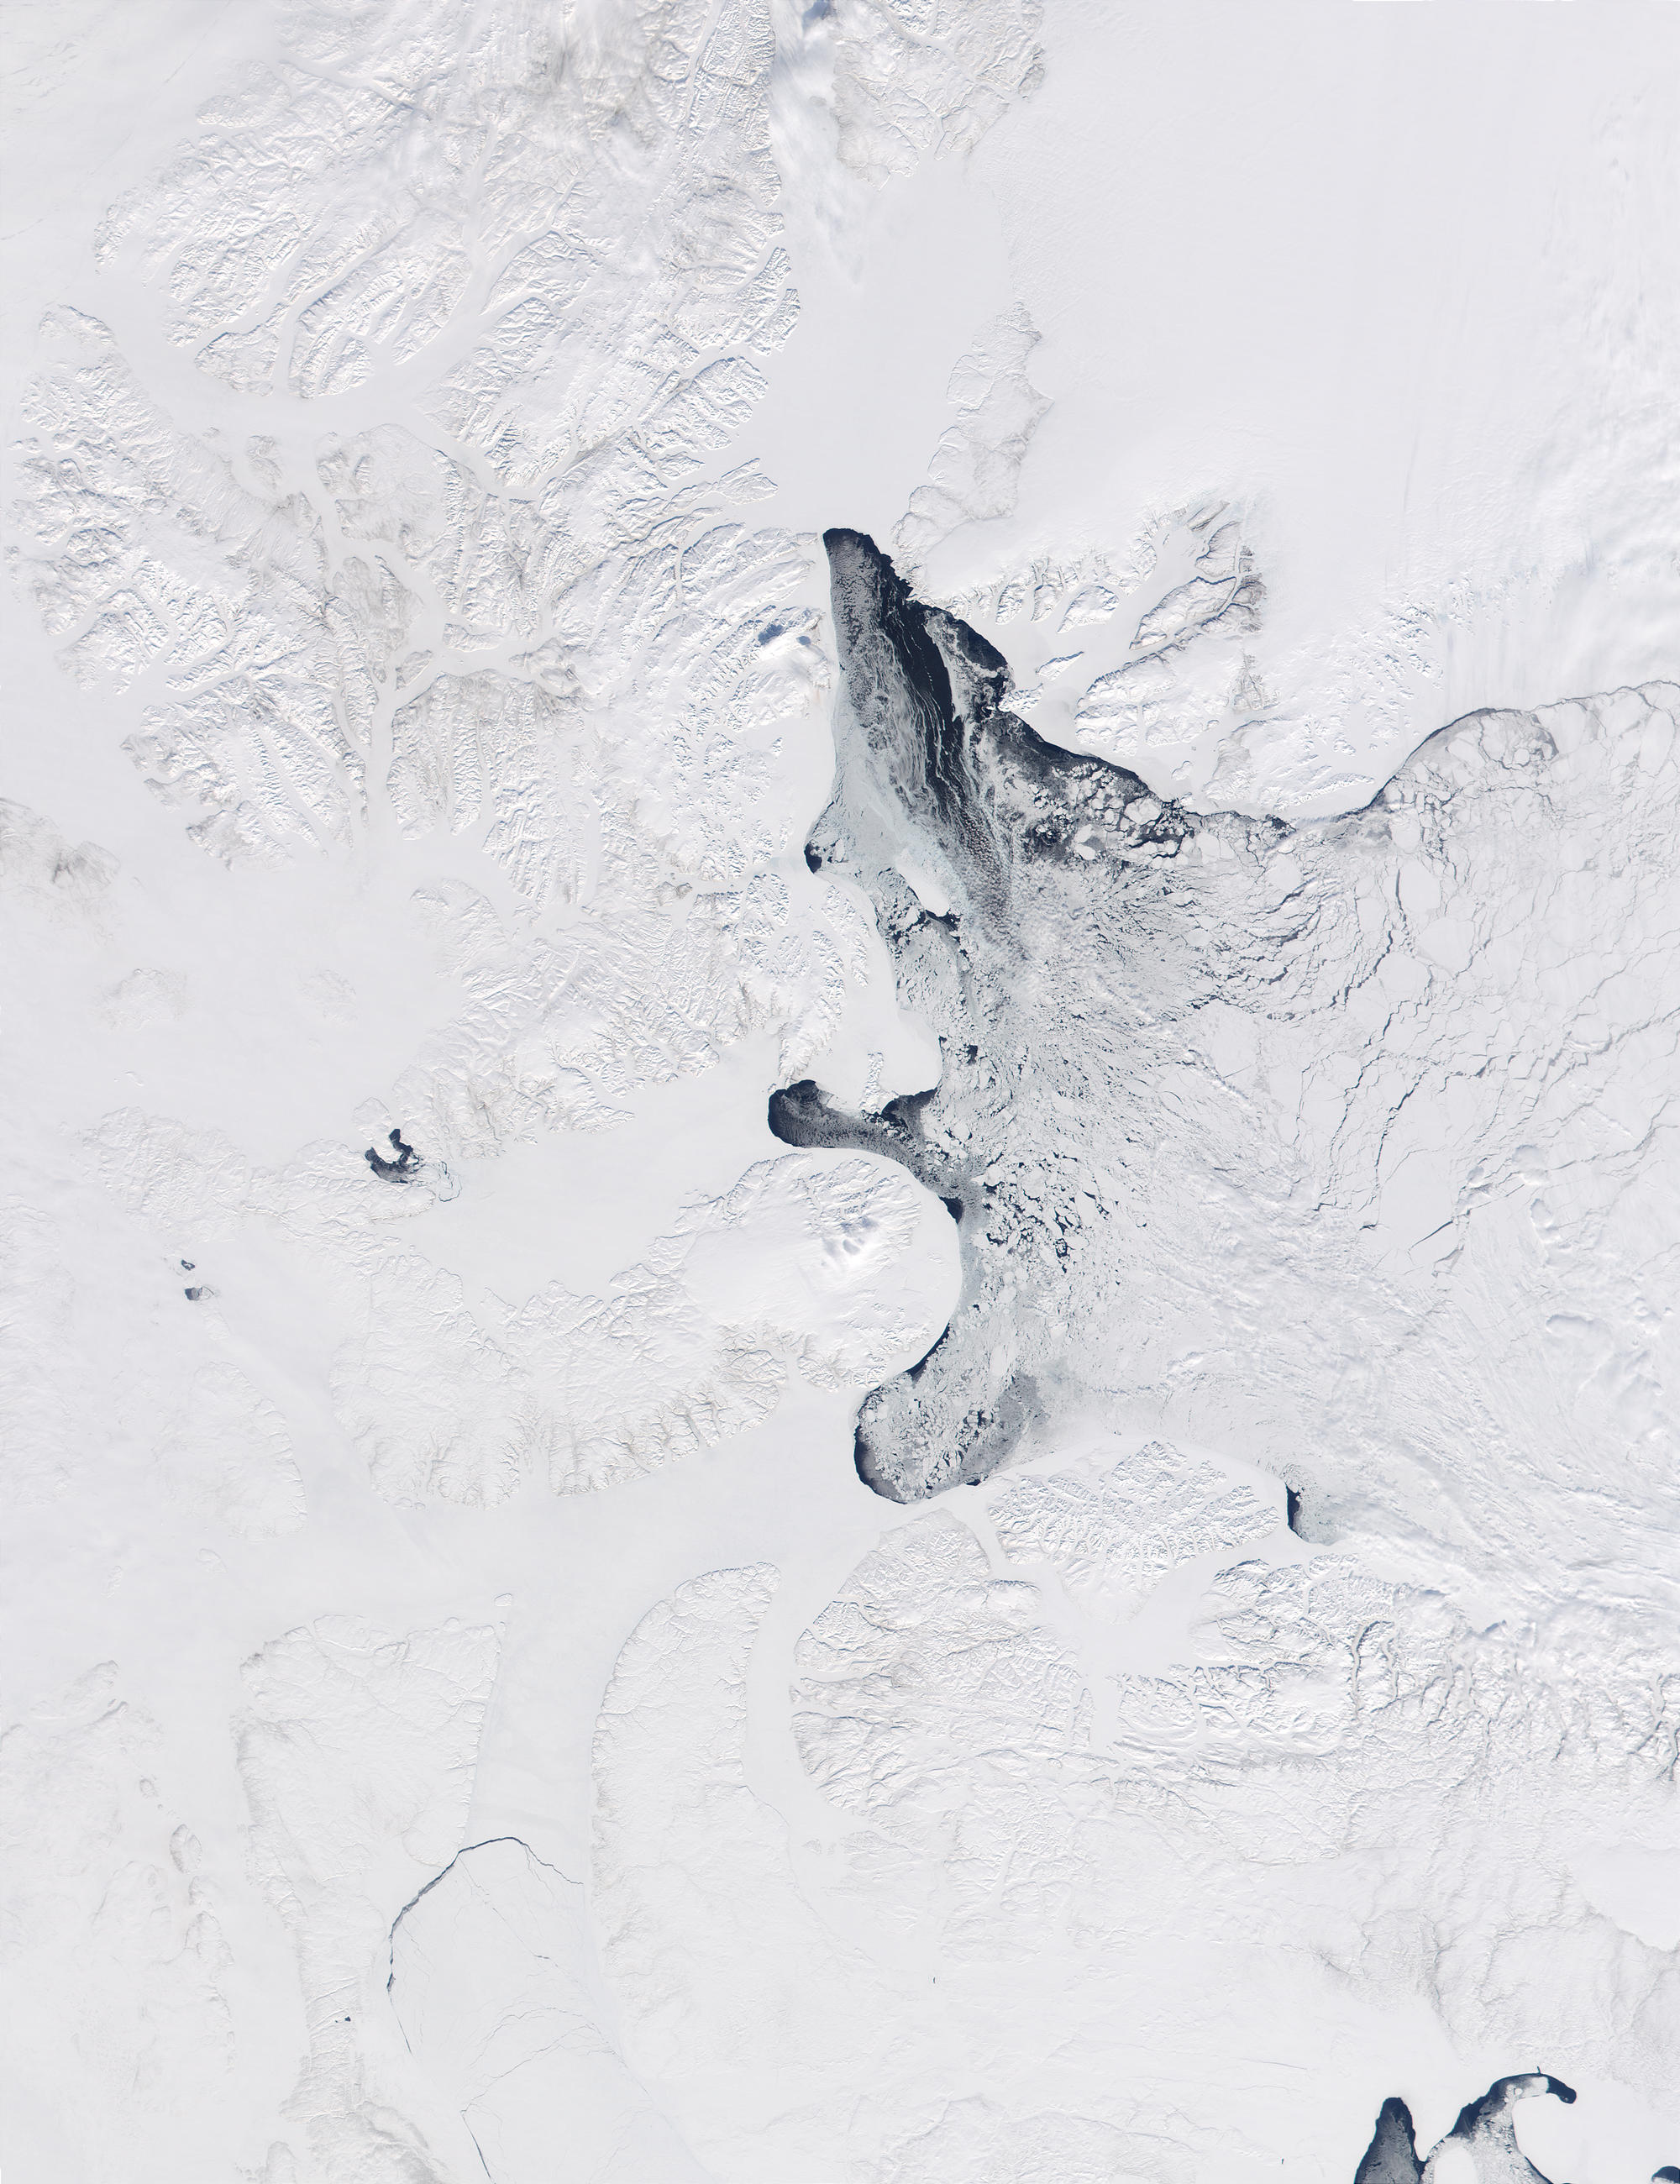 Baffin Bay and Northernmost Canada - related image preview